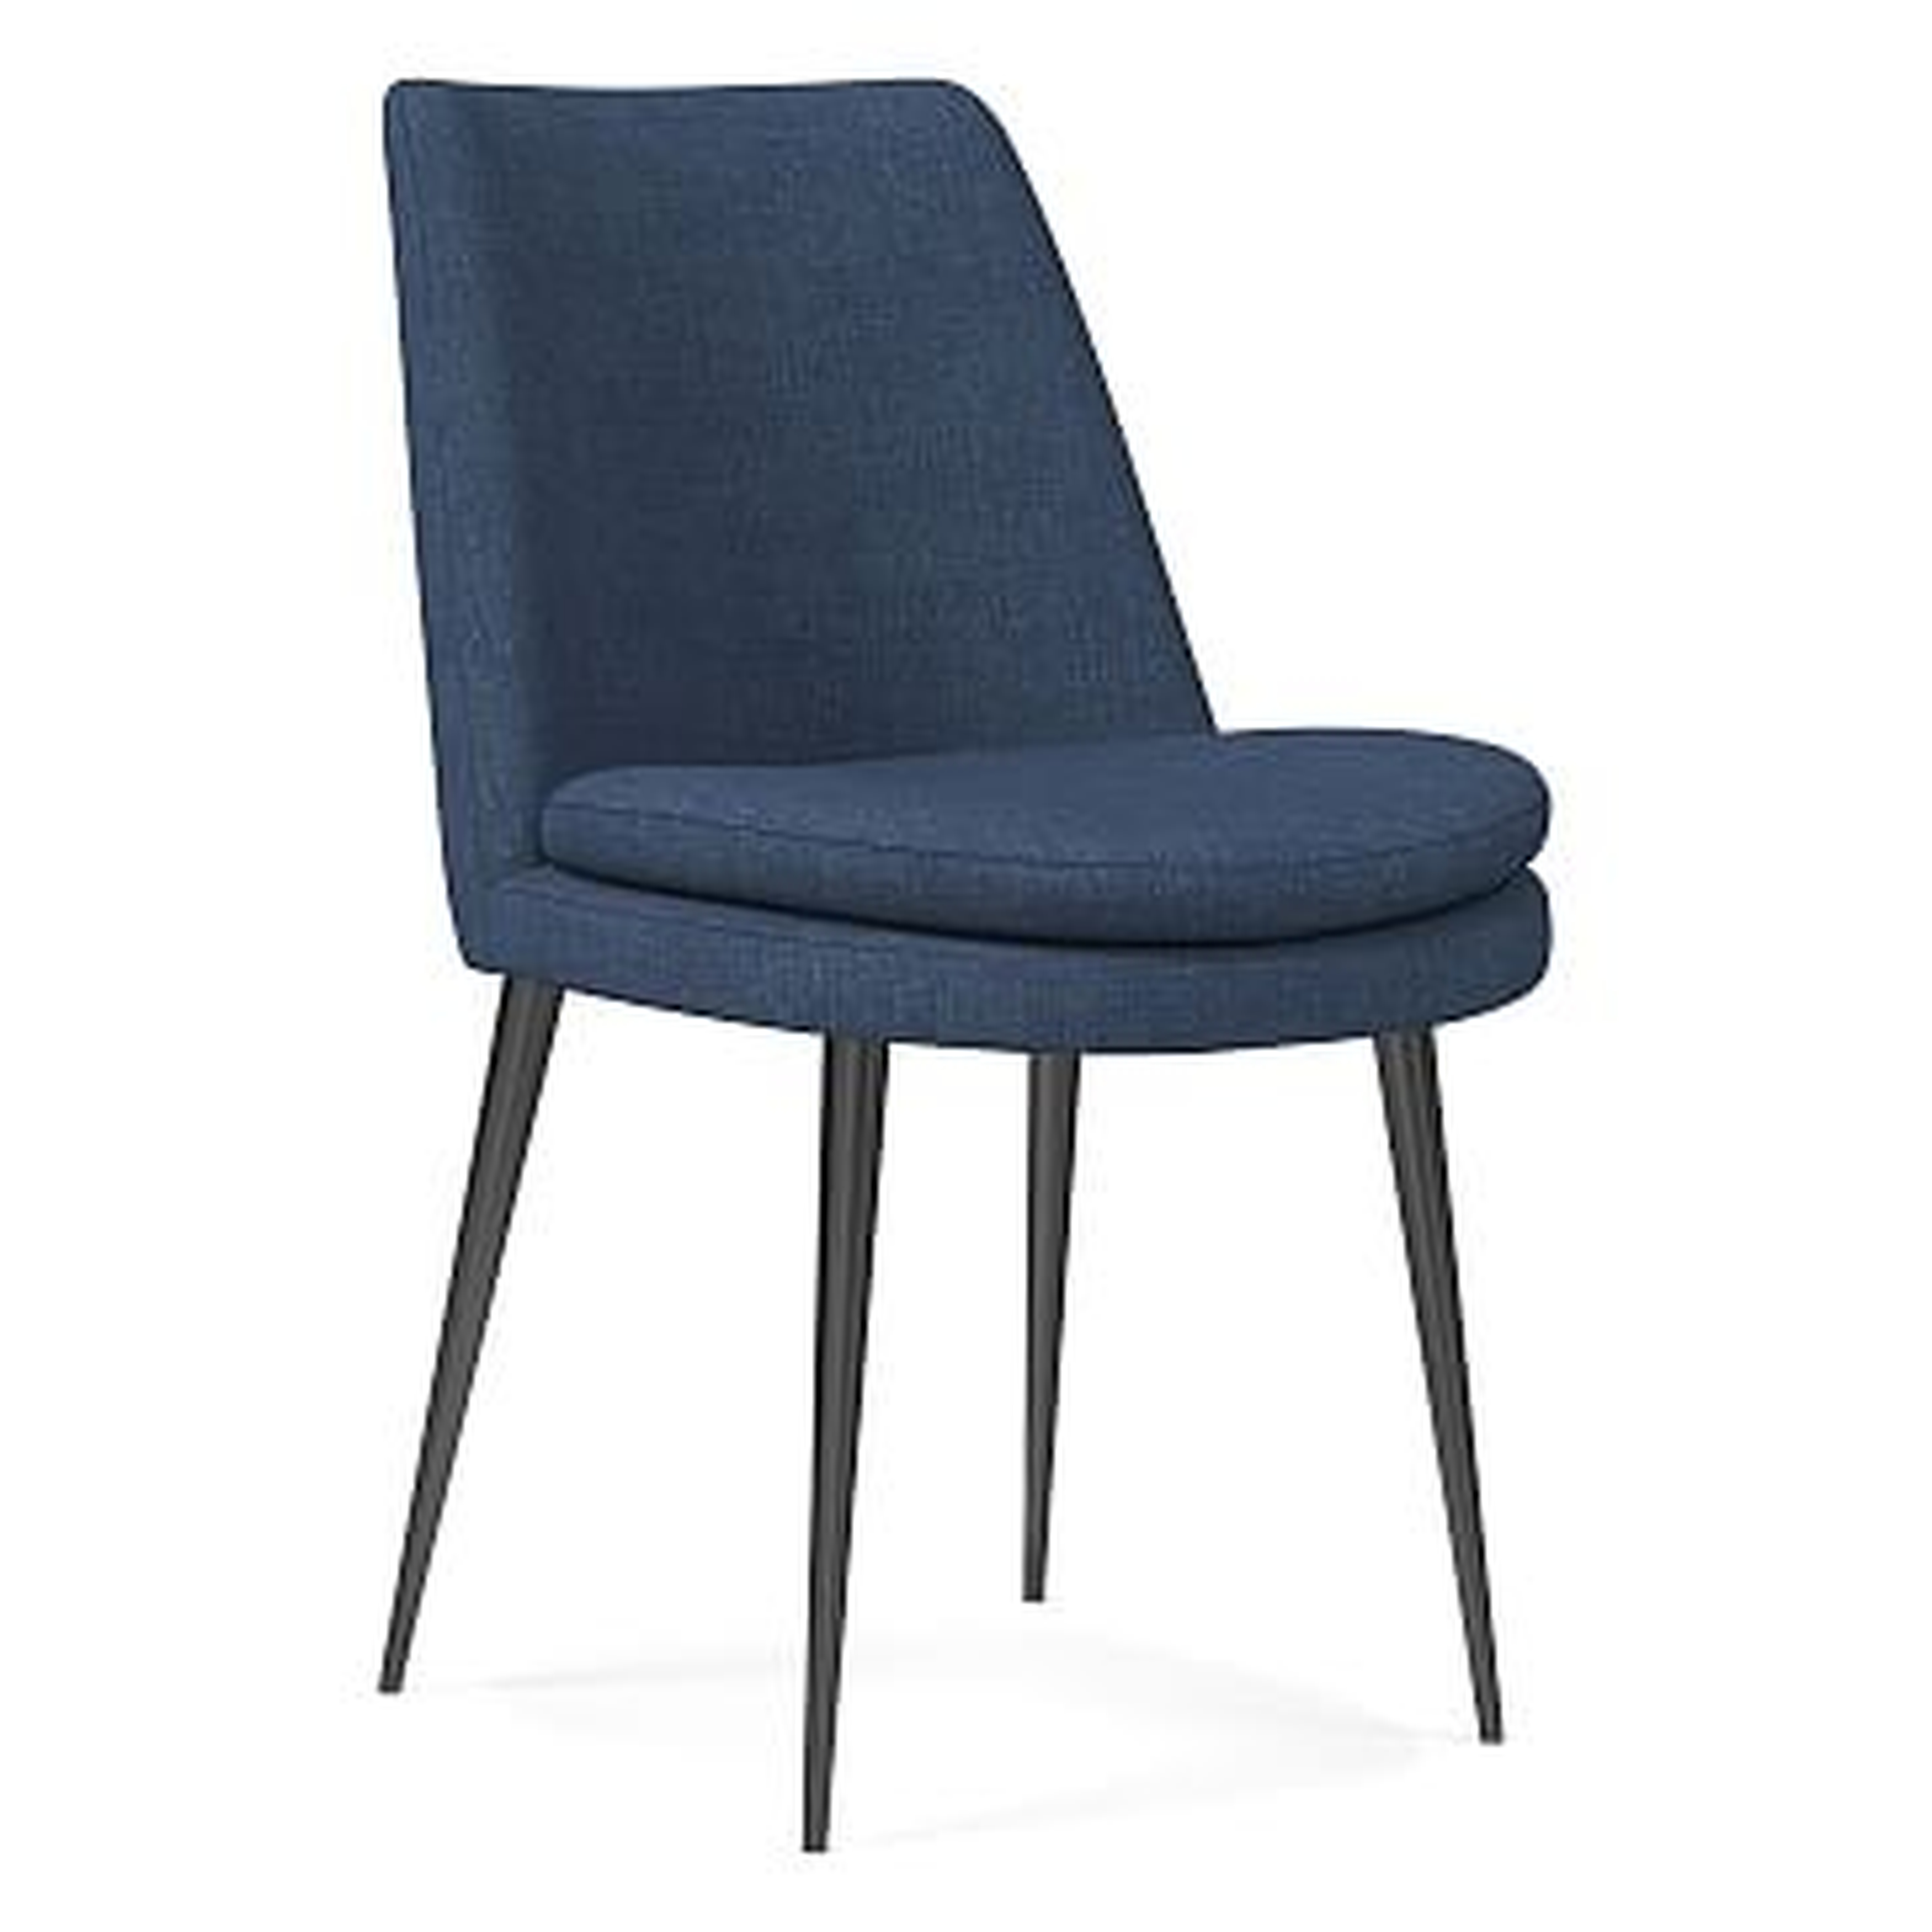 Finley Low Back Dining Chair, Performance Yarn Dyed Linen Weave, French Blue, Gunmetal - West Elm